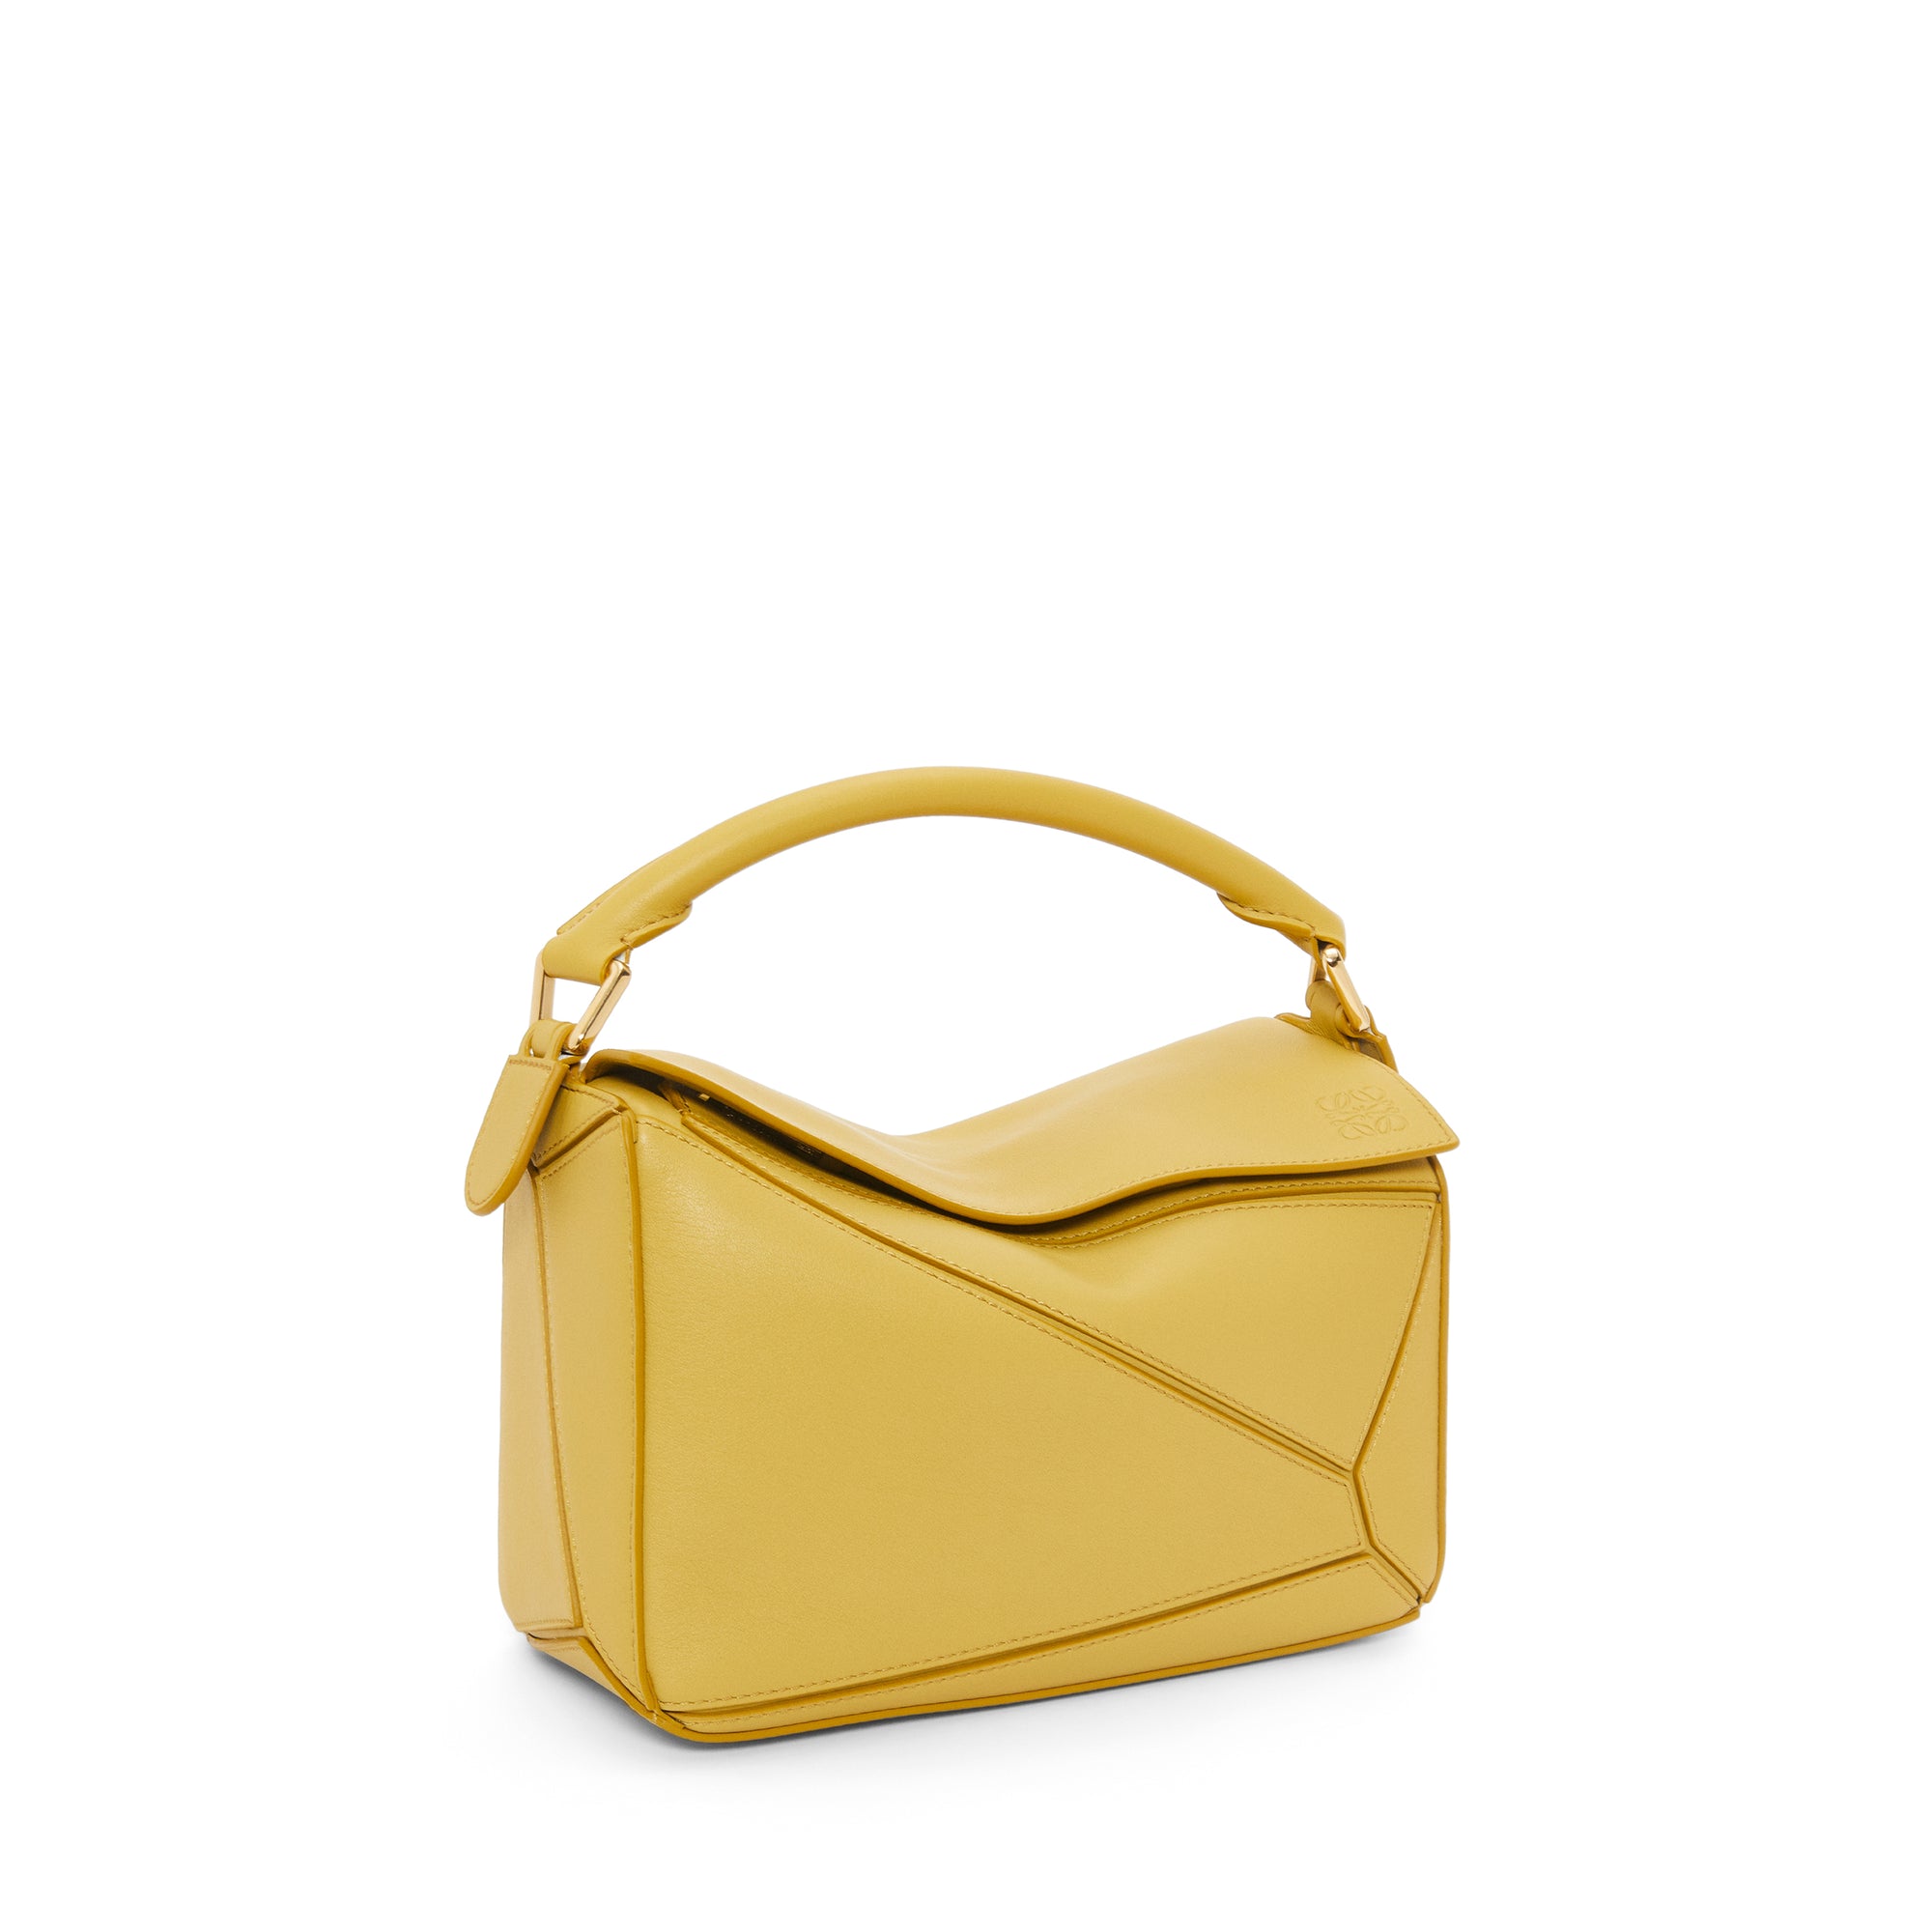 Loewe - Women’s Puzzle Small Bag - (Bright Ochre) view 4